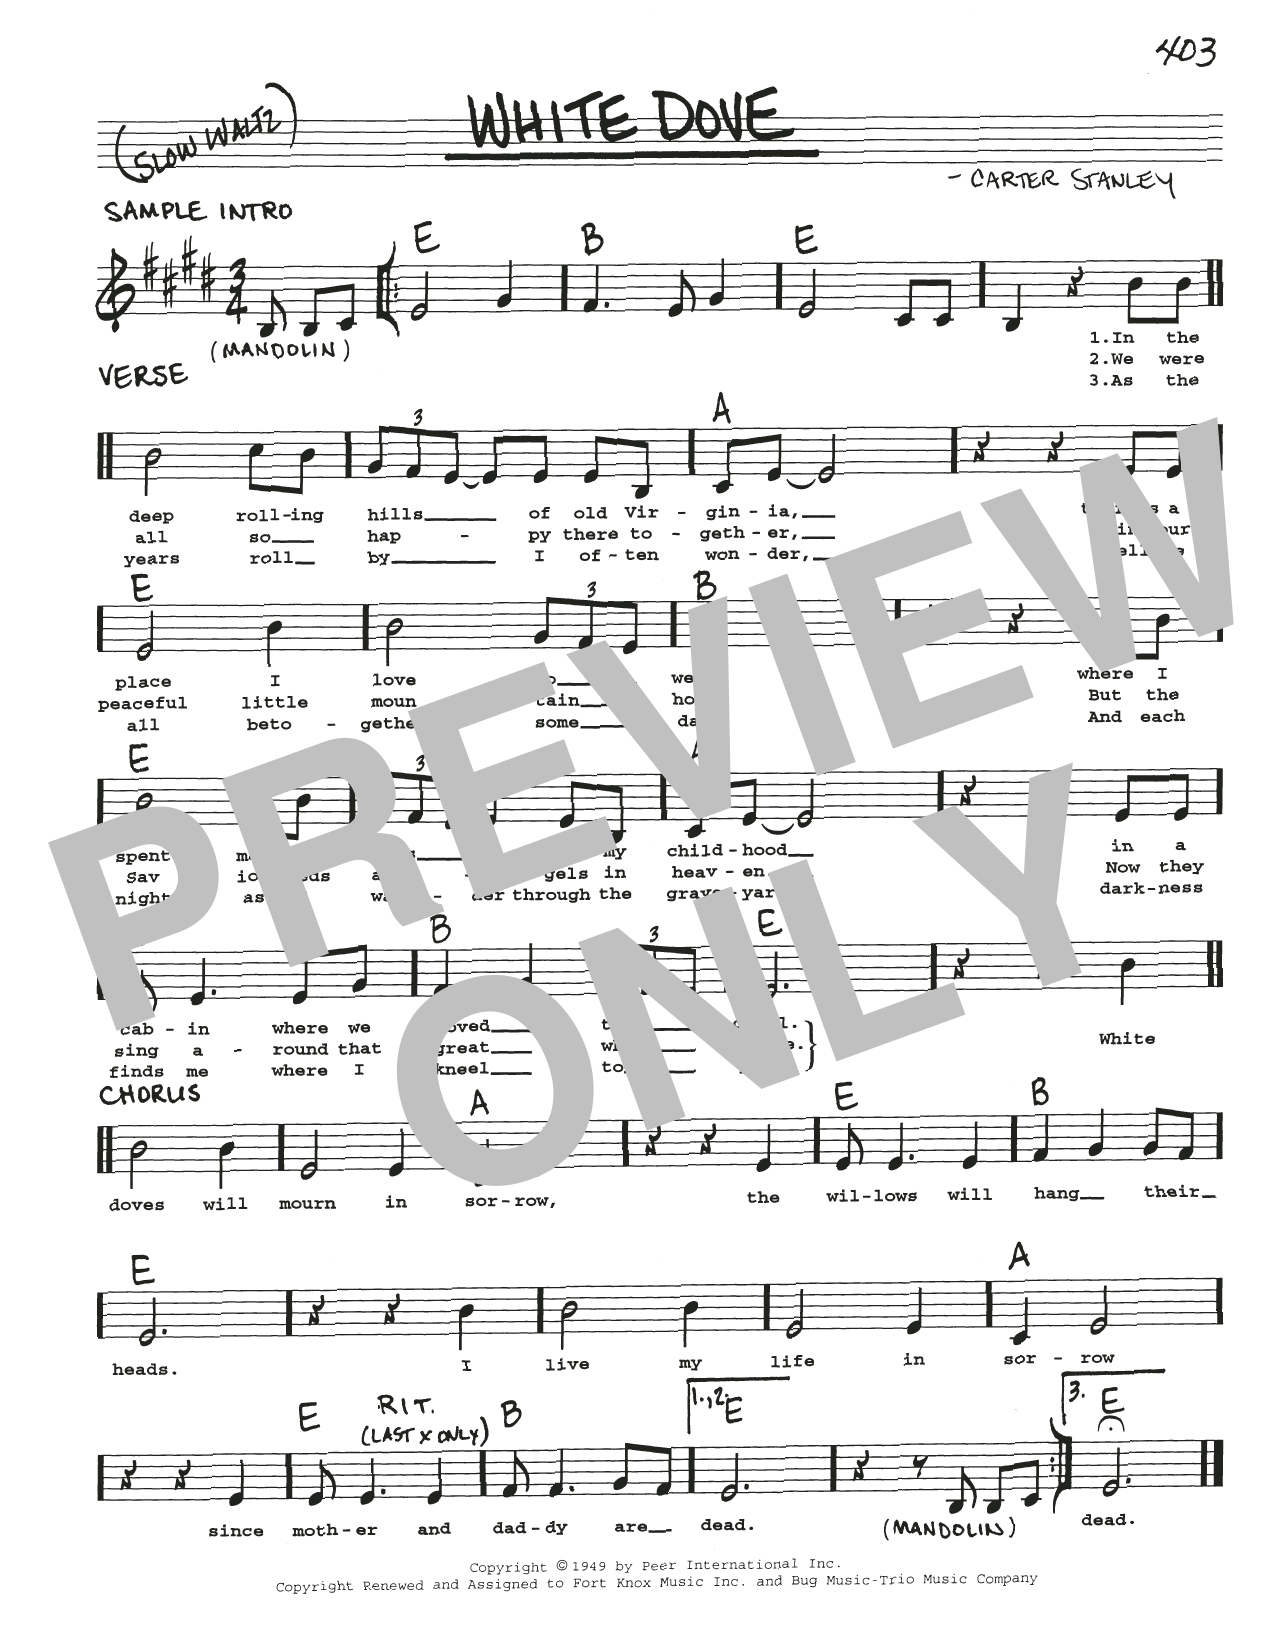 Download Carter Stanley White Dove Sheet Music